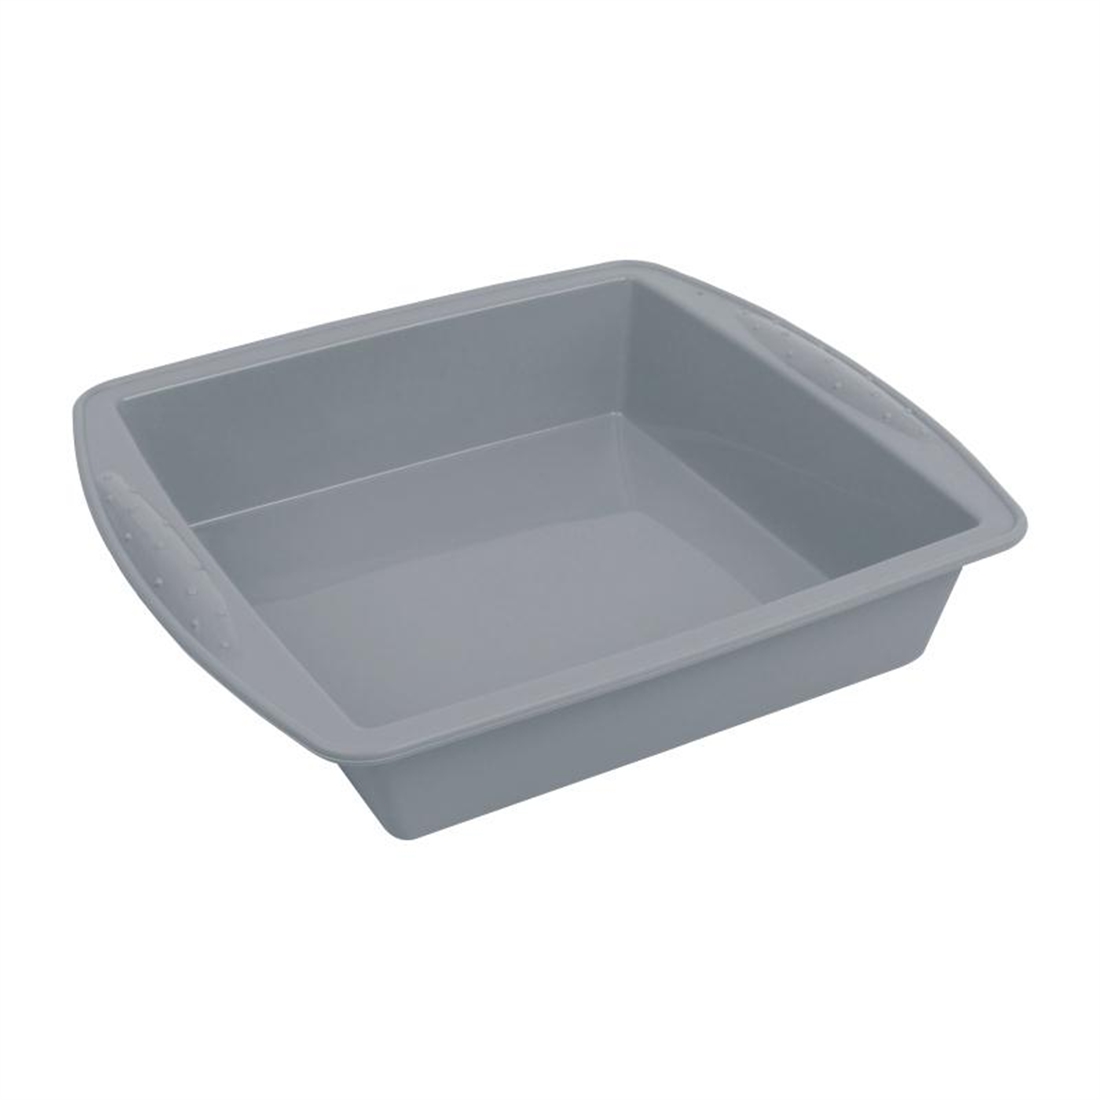 Vogue Flexible Silicone Square Bake Pan 245mm